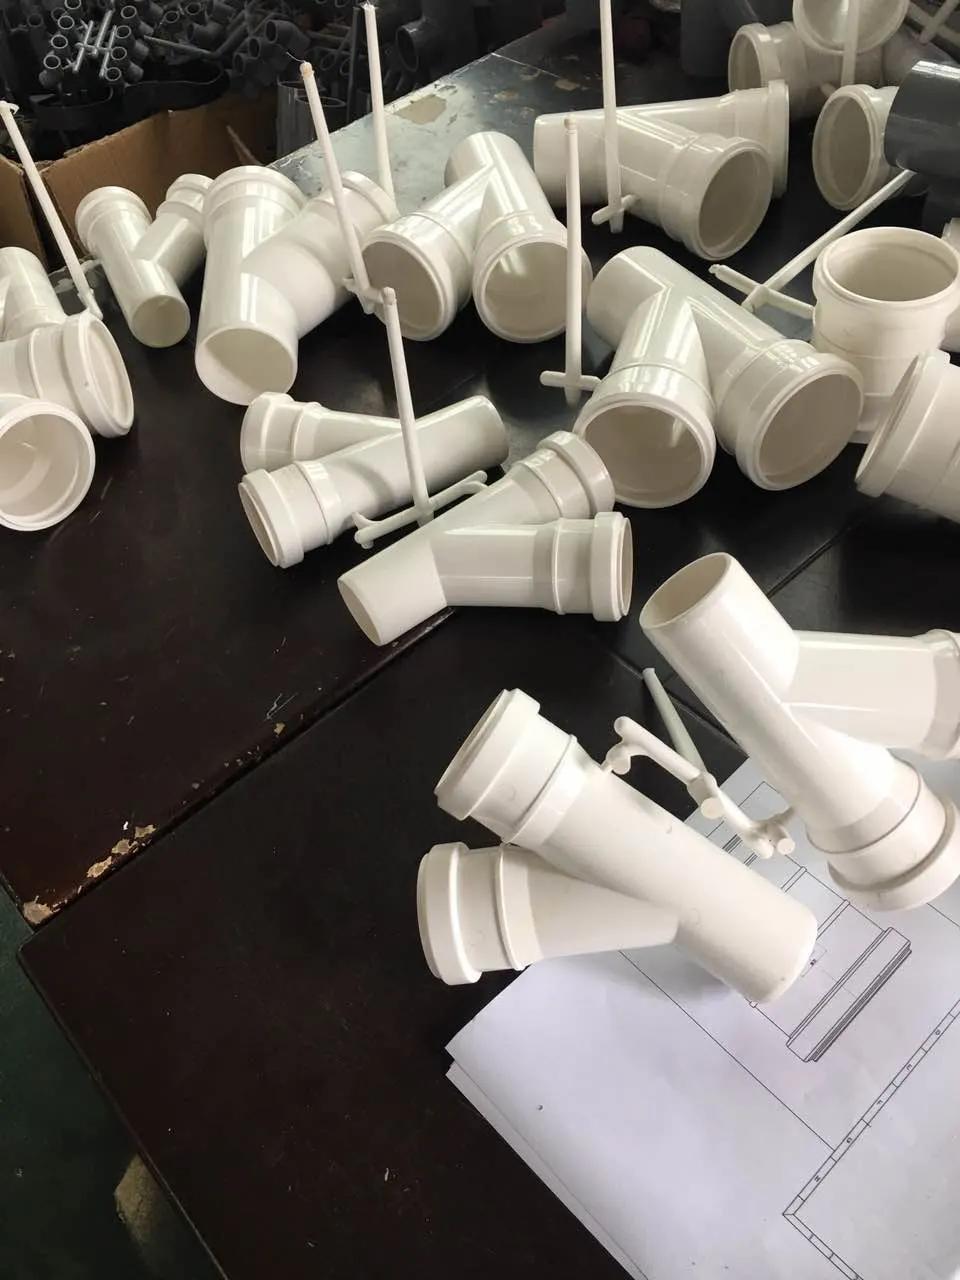 Plastic Injection PVC Pipe Fitting Mould